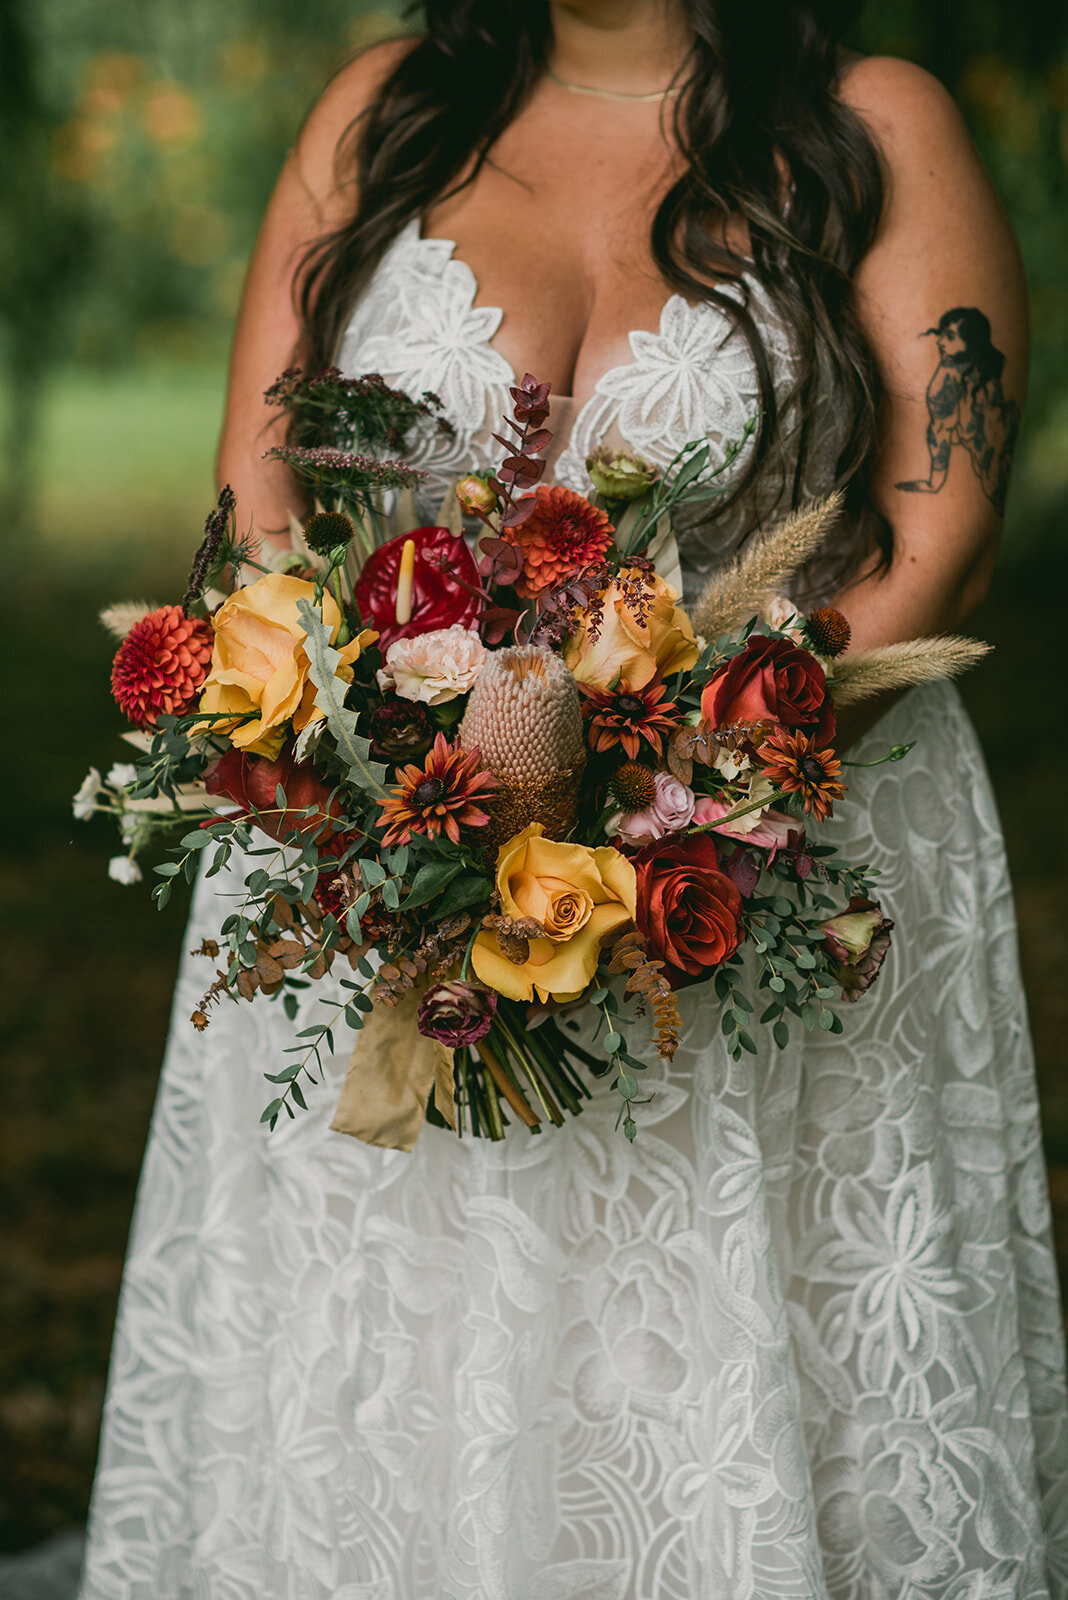 Bridal bouquet for Pemberton wedding - Within the Flowers